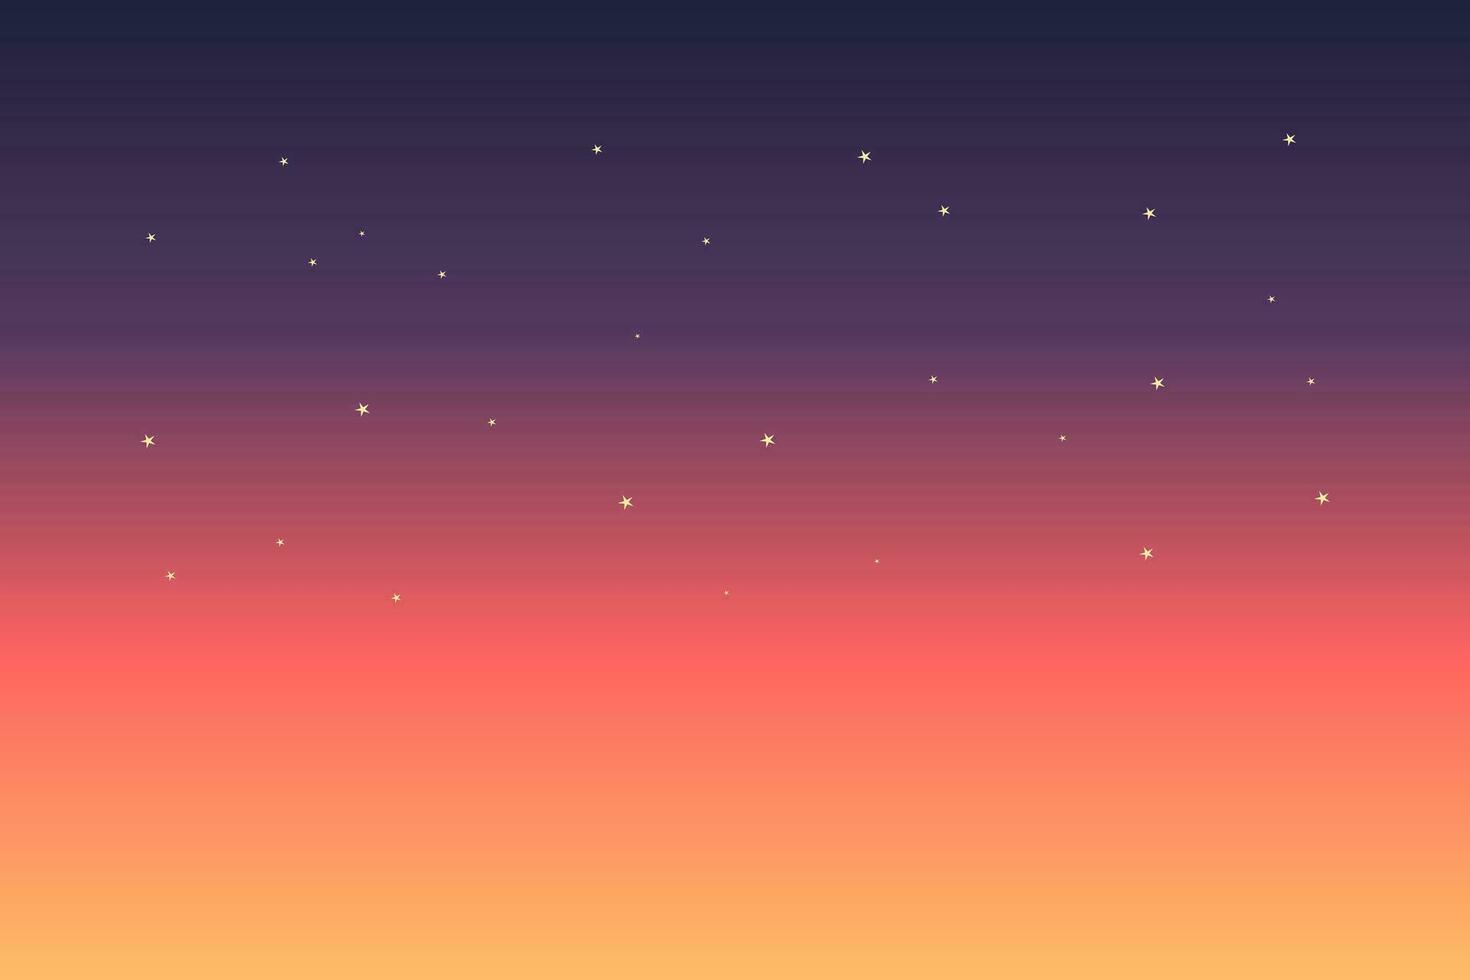 Sunset sky in evening with orange, yellow and purple gradient color. Star universe background. Vector illustration.